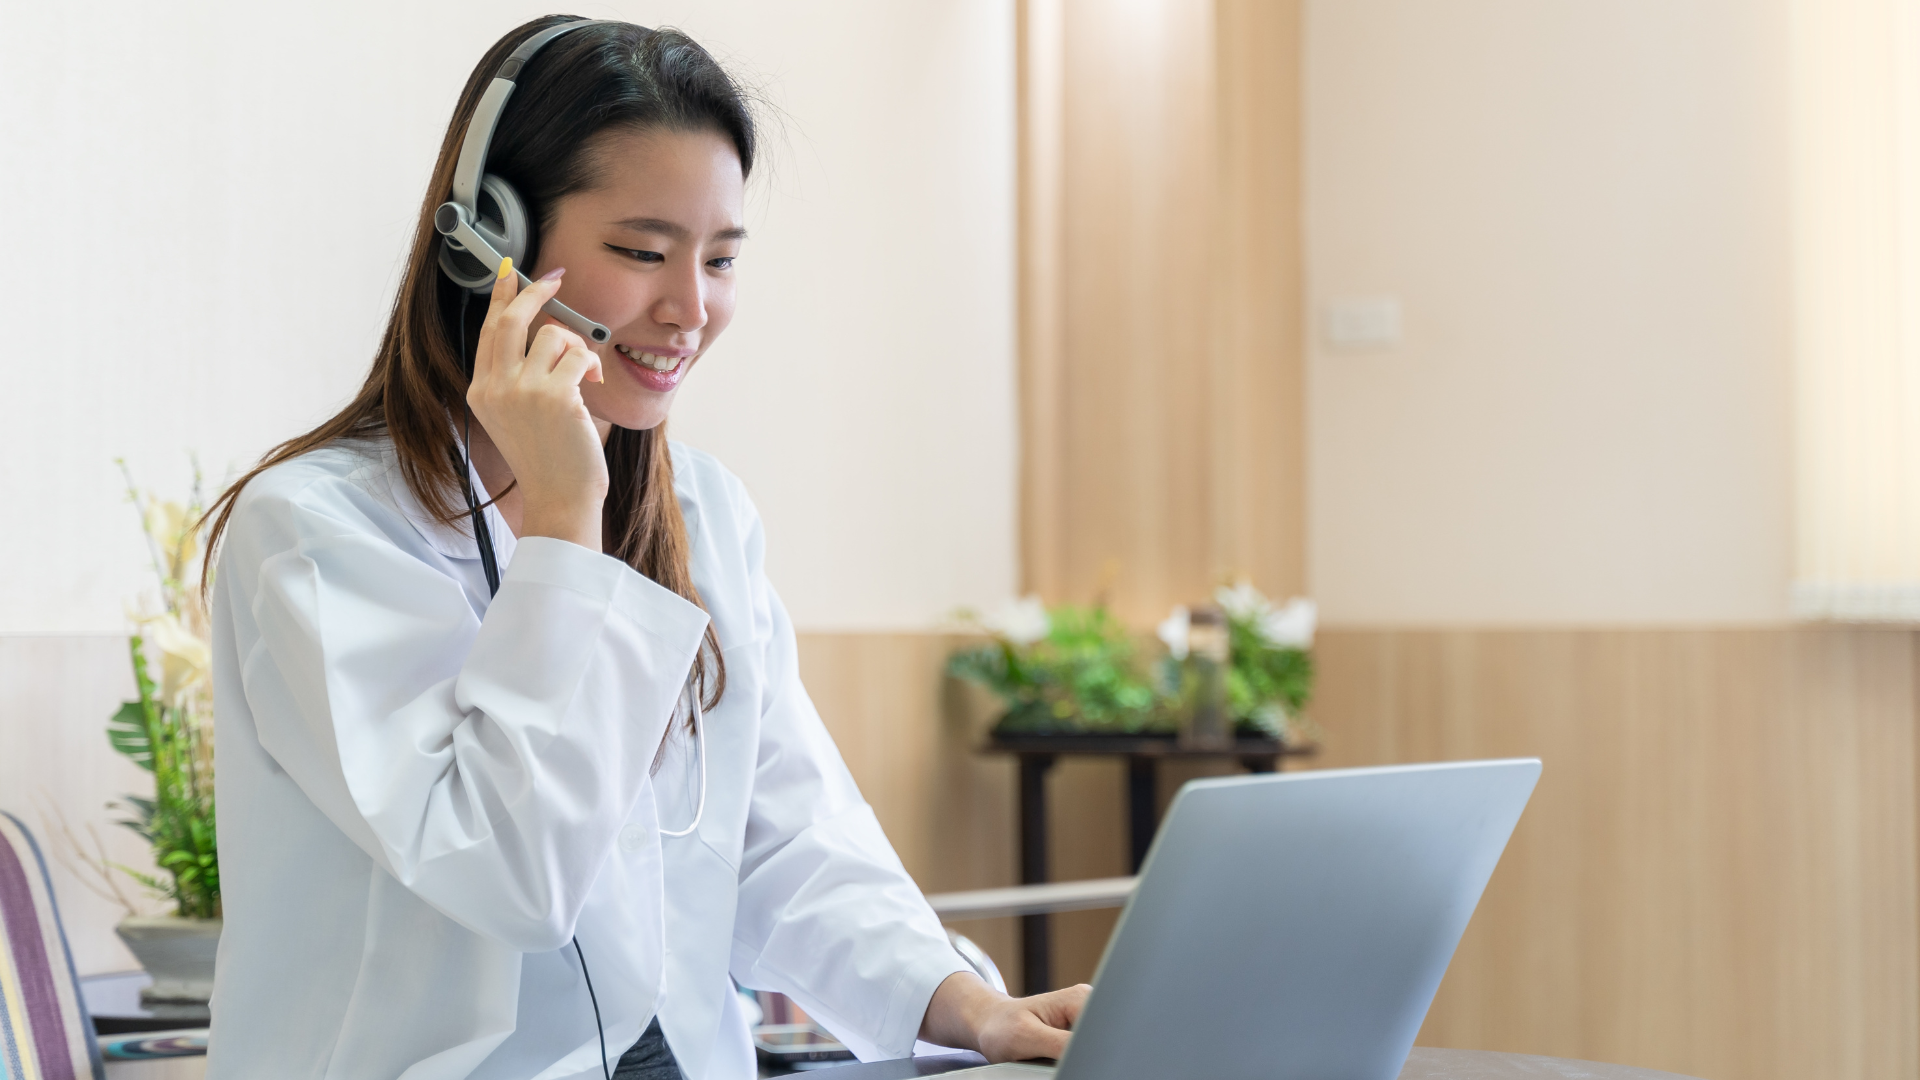 healthcare ucaas the future of practice communications